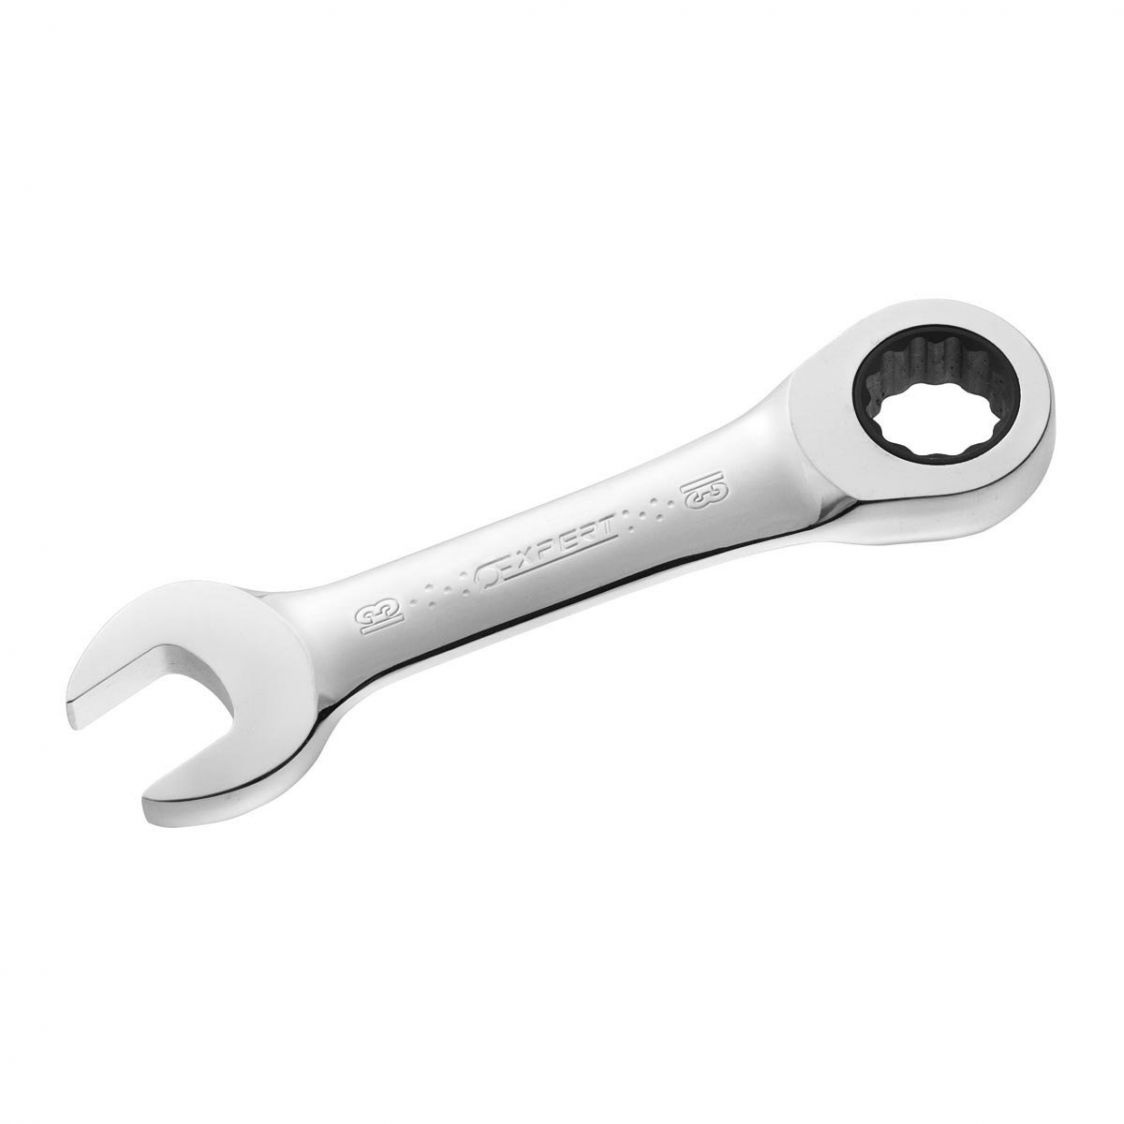 EXPERT by FACOM E110916 - 12mm Metric Stubby Ratchet Combination Spanner